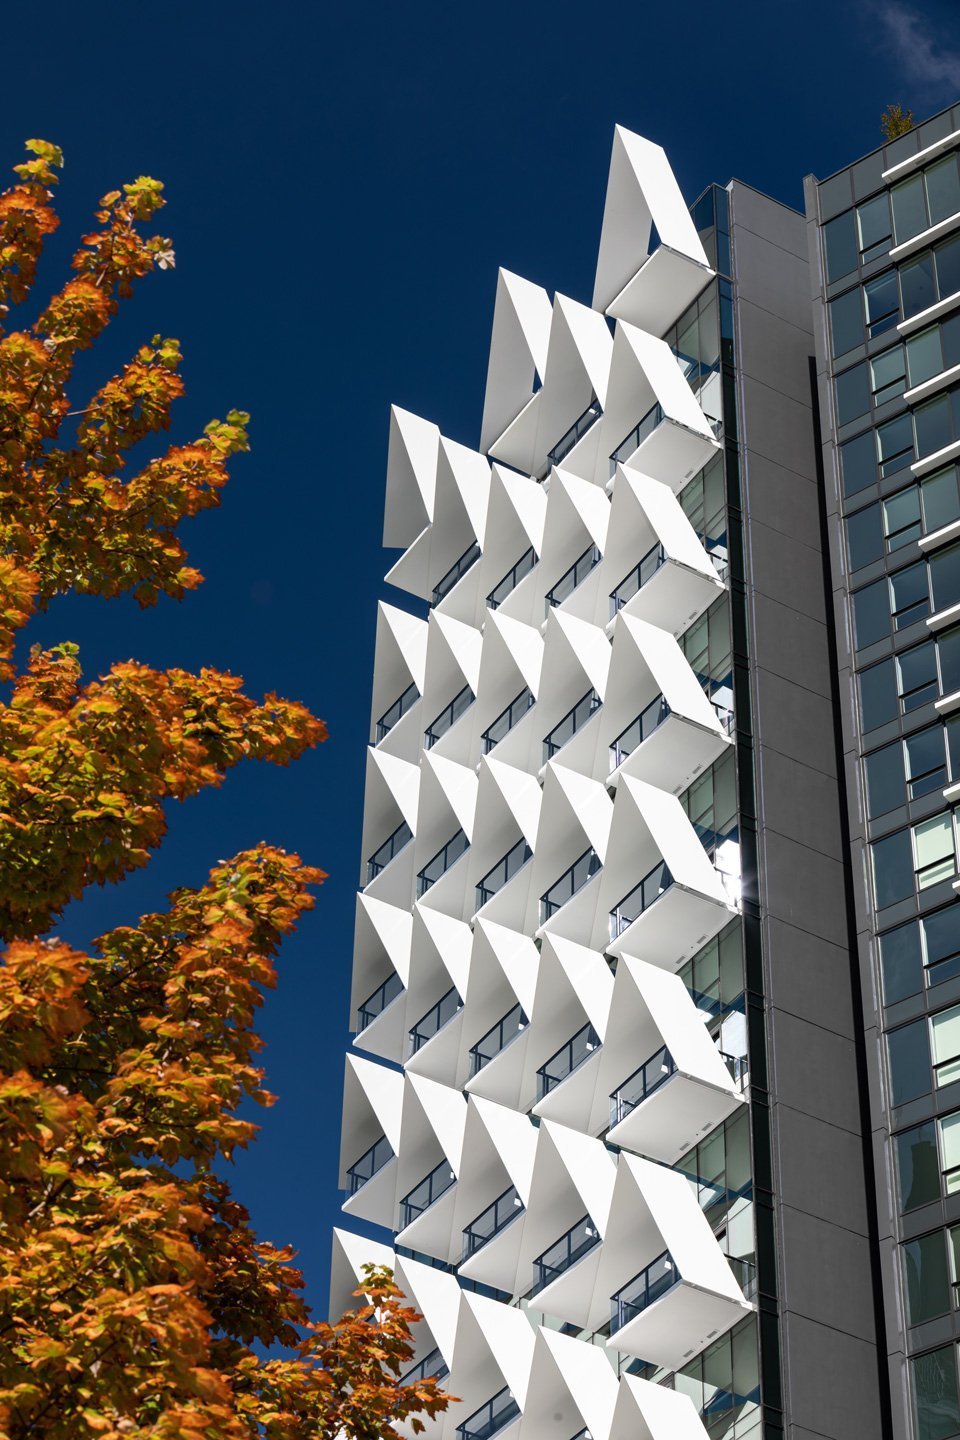 V-shaped white steel structures on façade